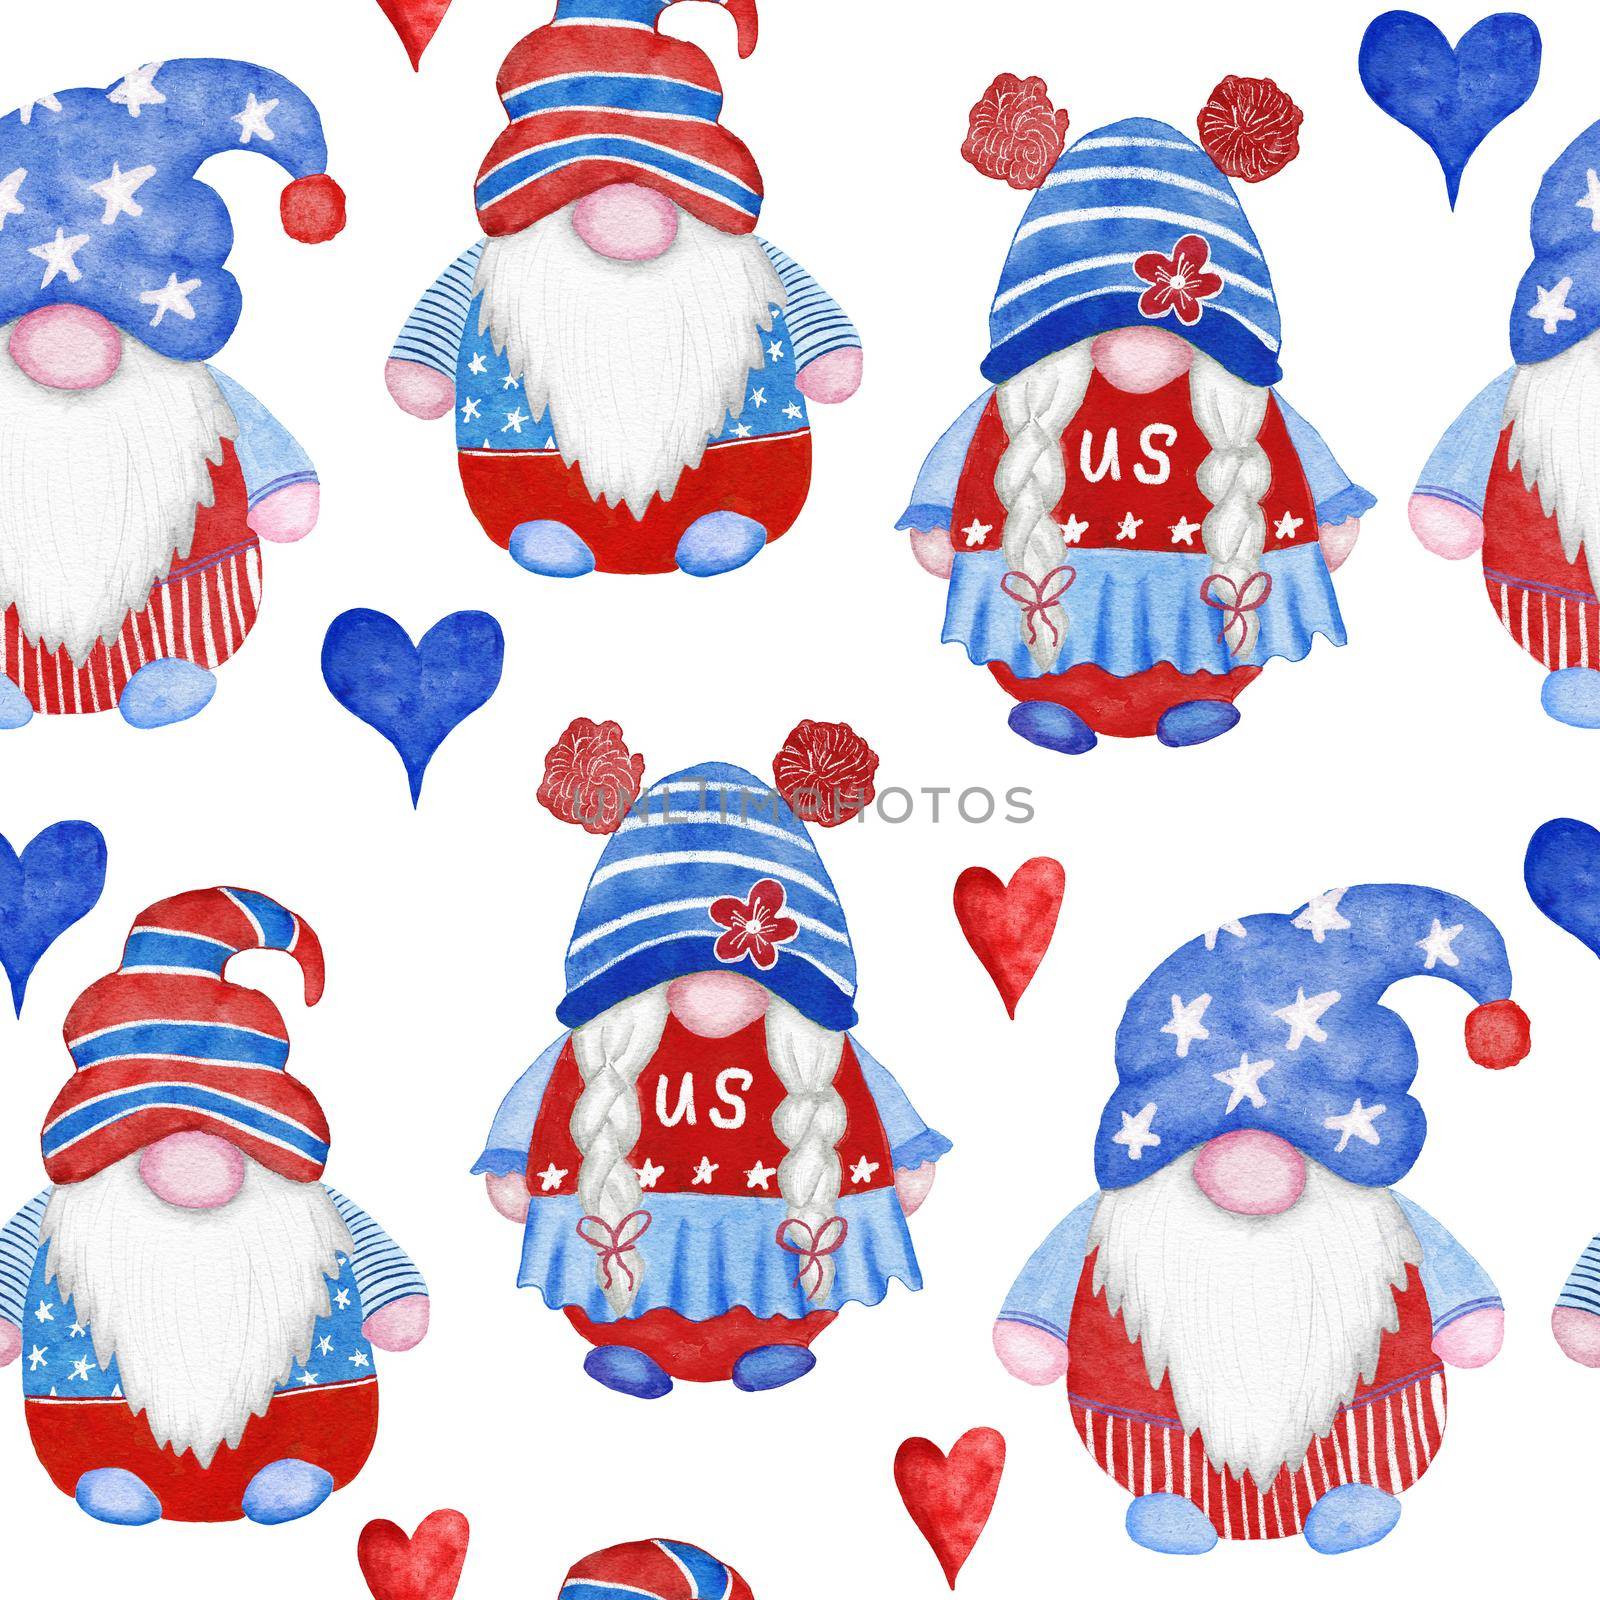 Watercolor hand drawn seamless border with 4th of july gnomes background, fourth of july Independence day patriotic print, red blue white balloons gifts, summer party decoration, stars and stripes